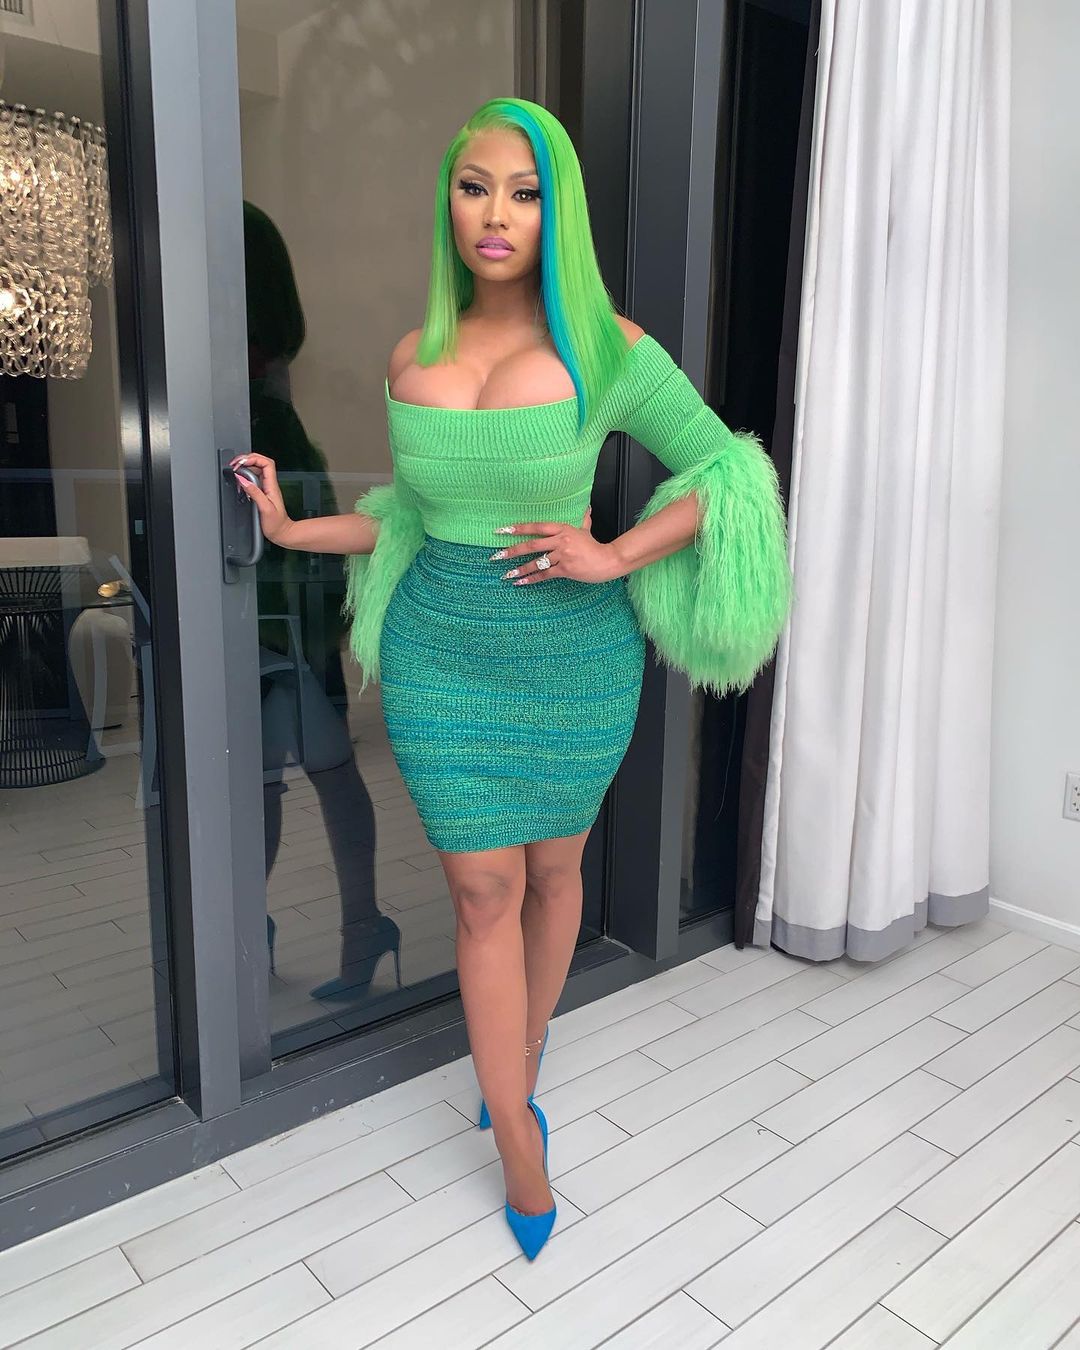 A photo of Nicki Minaj standing on a terrace, in a green blouse and skirt with a pair of blue pumps to match.